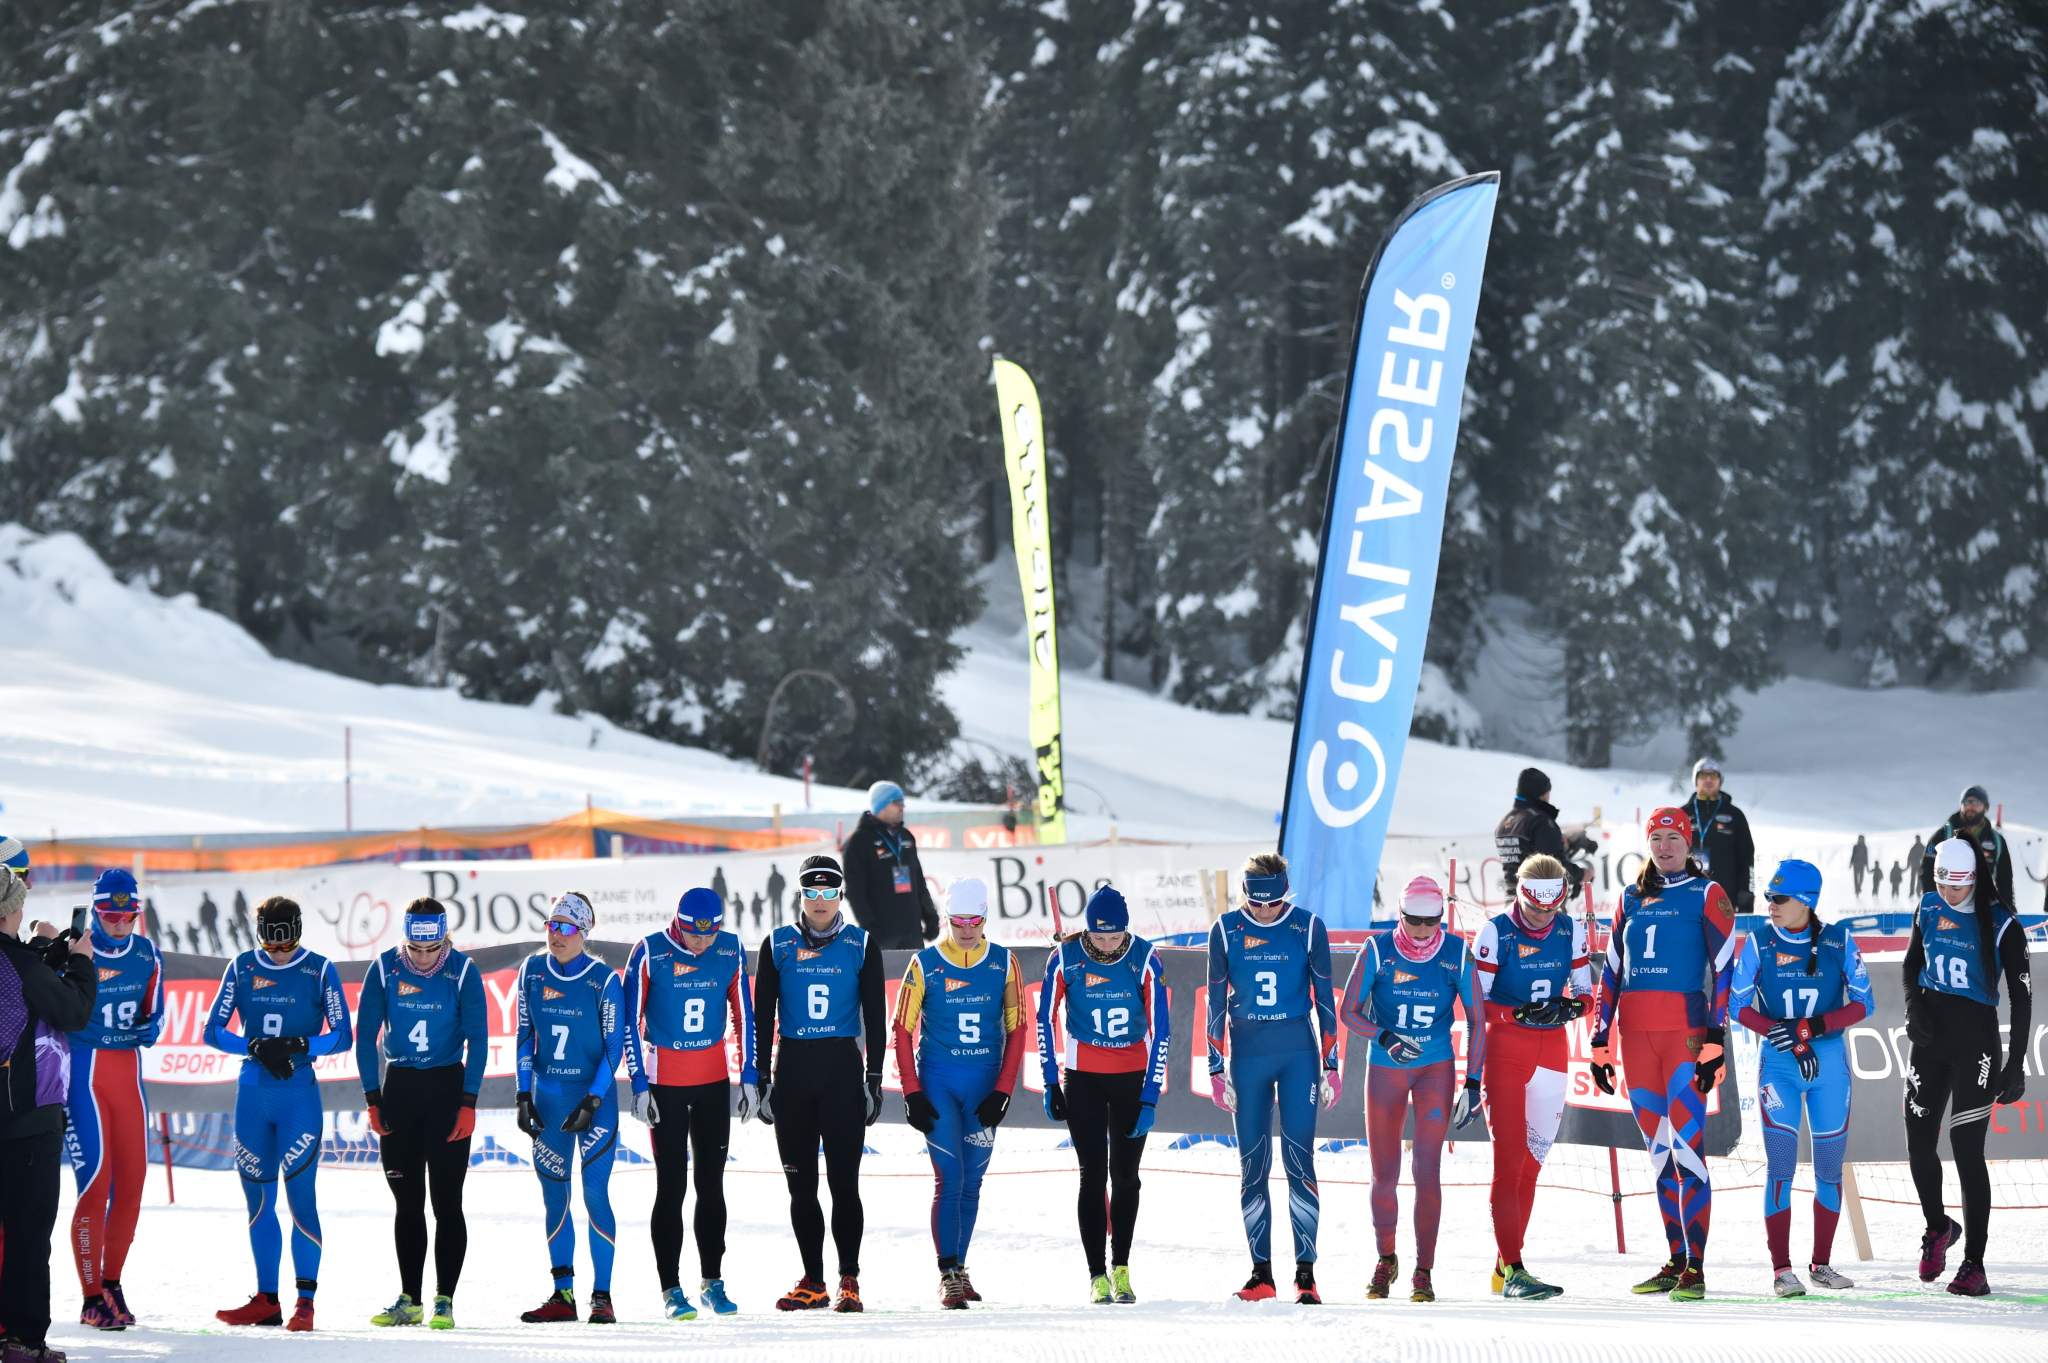 The first ever Winter Triathlon World Cup will be held in the Chinese resort of Harbin on January 4, 2020 ©ITU